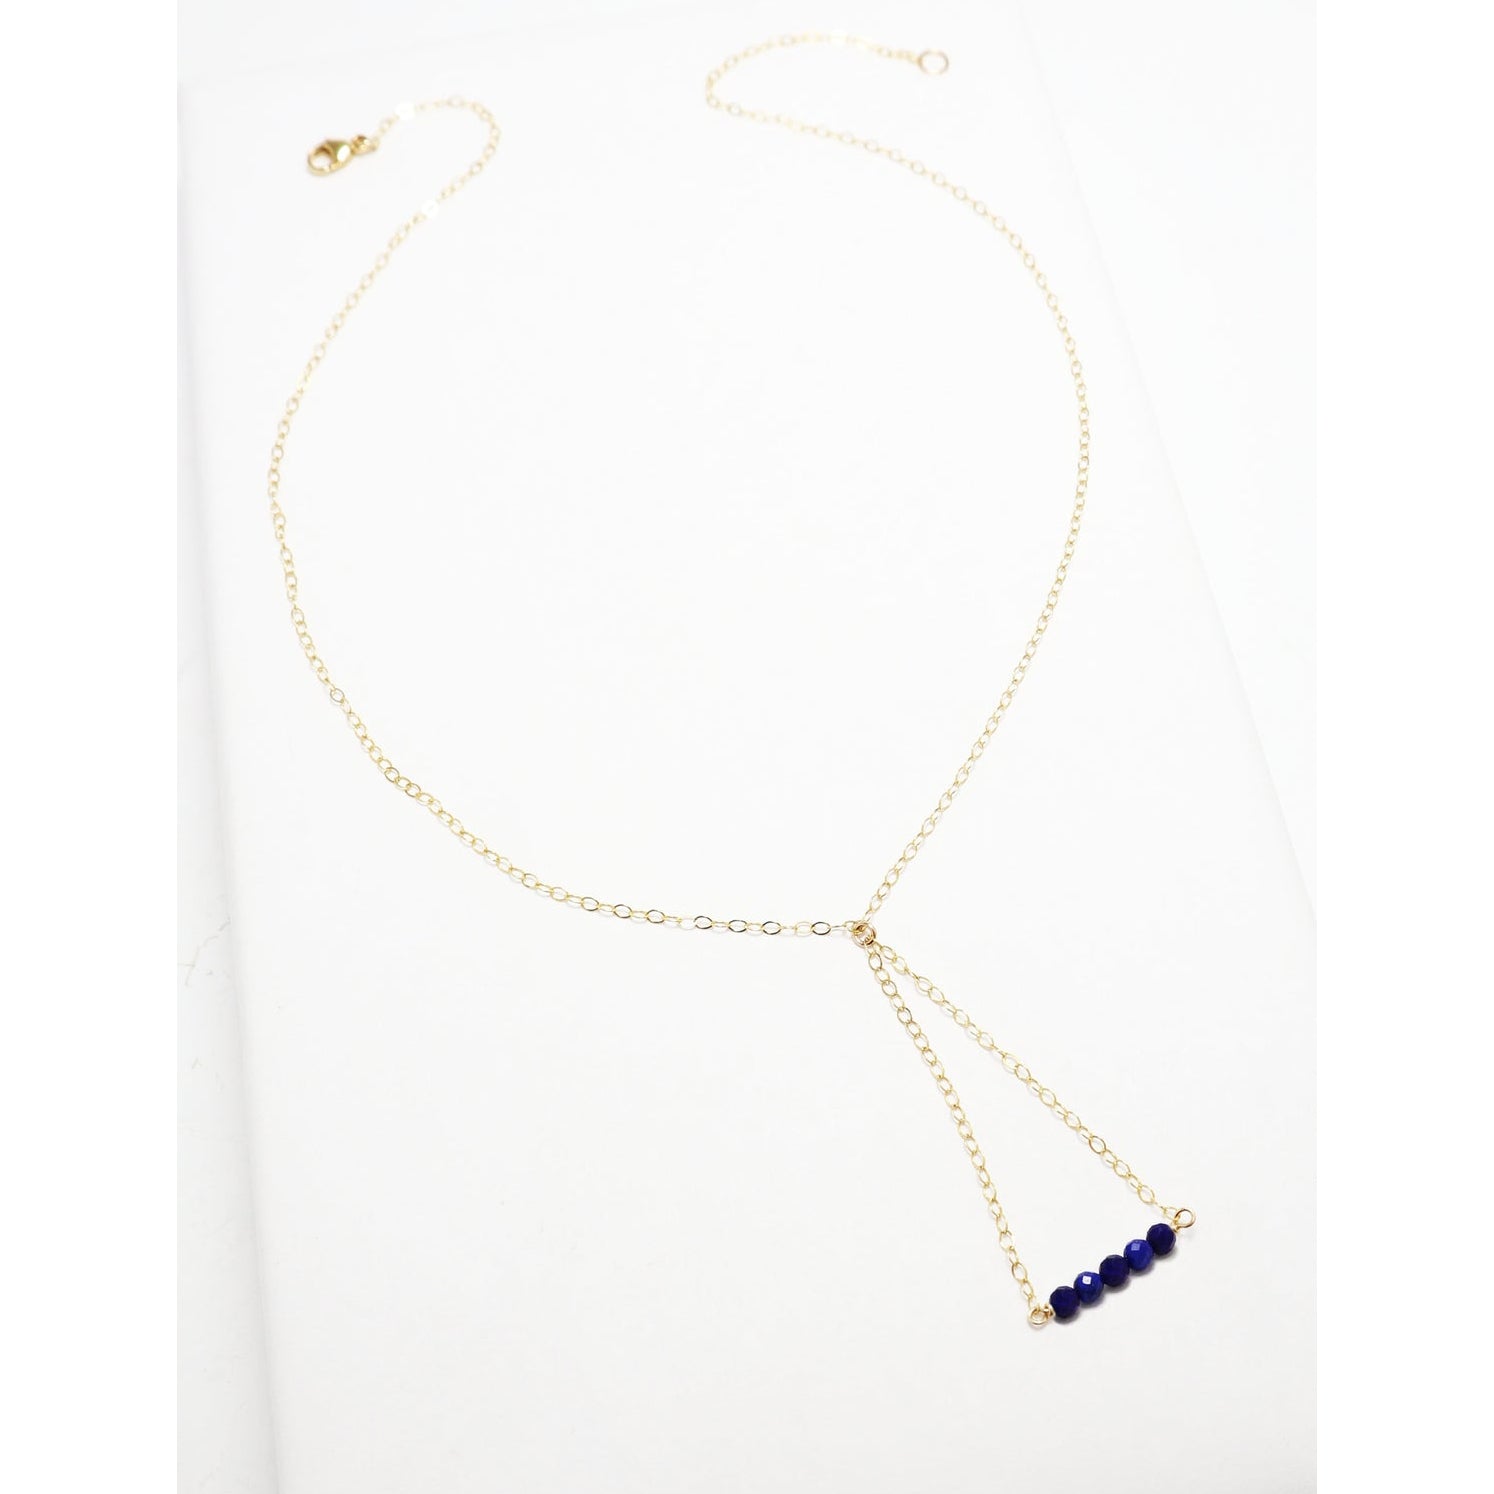 The September Necklace No. III